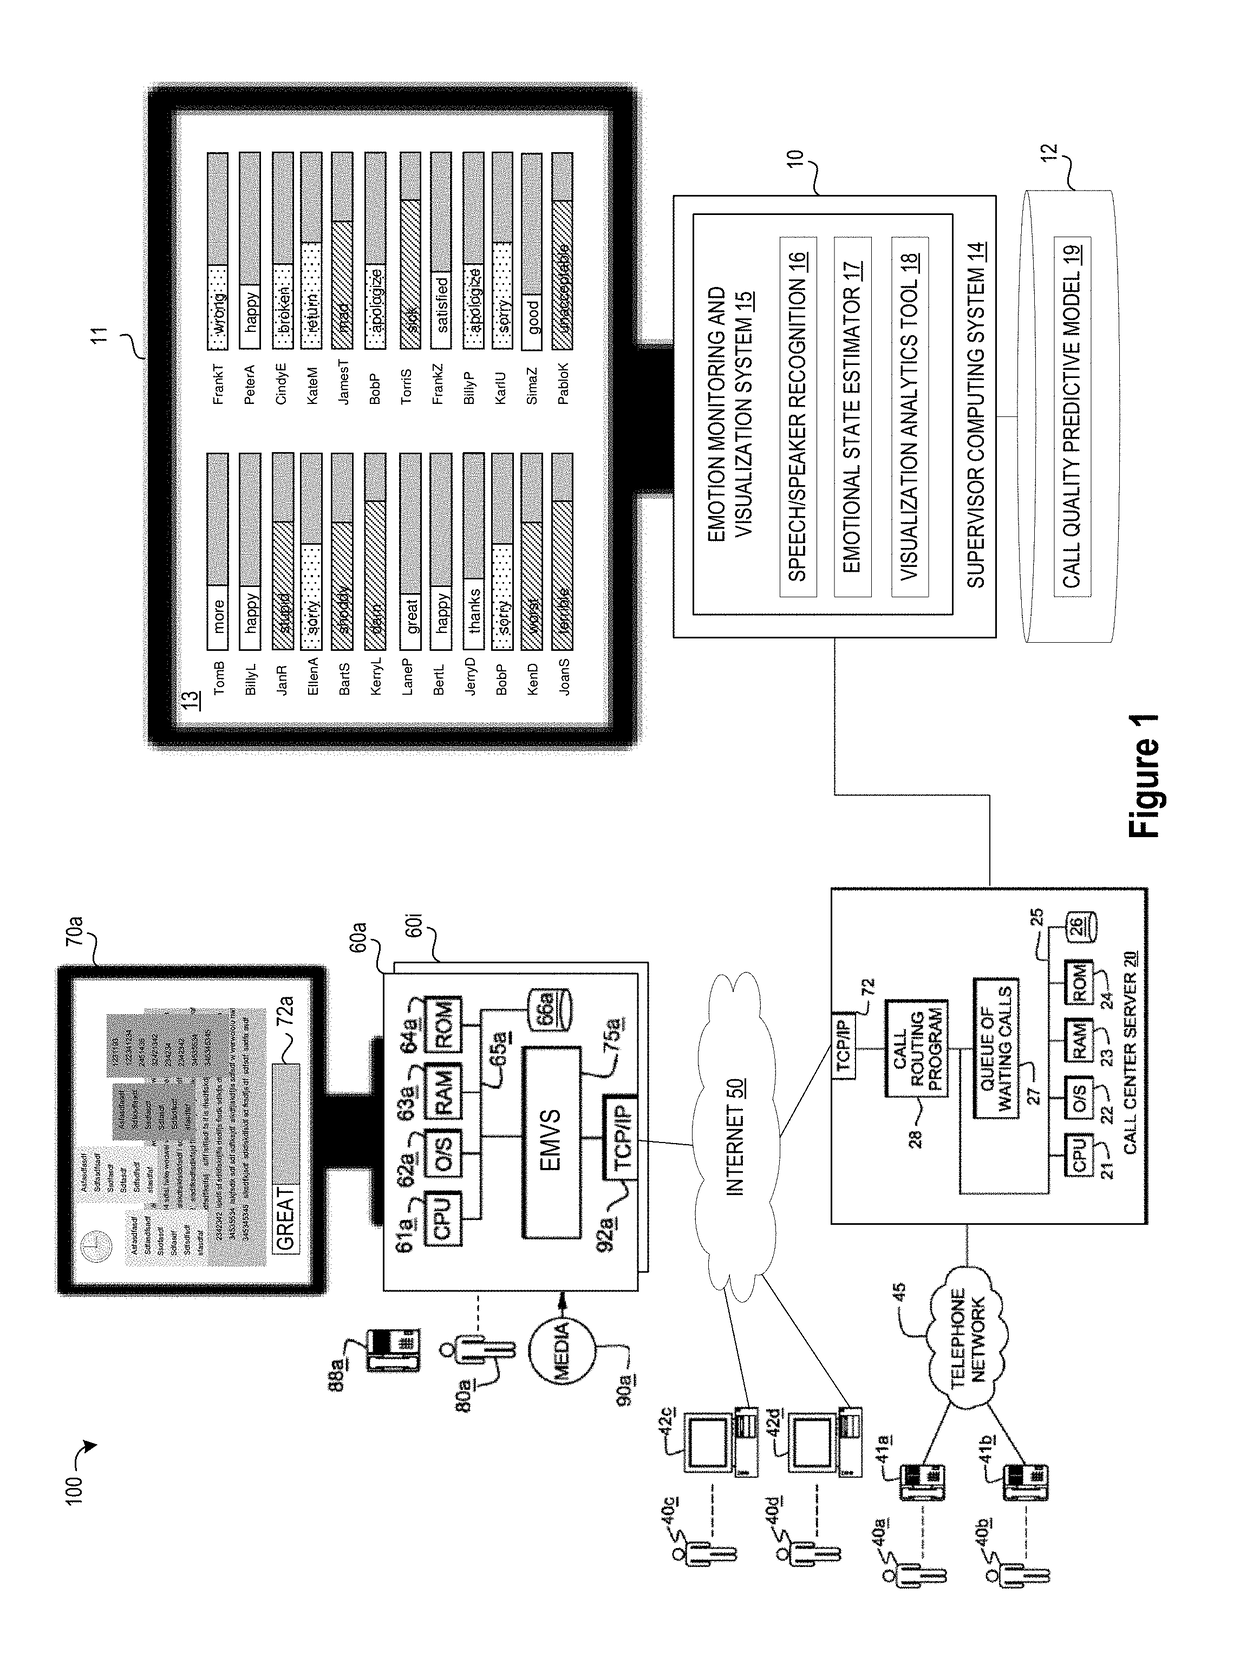 System and method for monitoring and visualizing emotions in call center dialogs at call centers